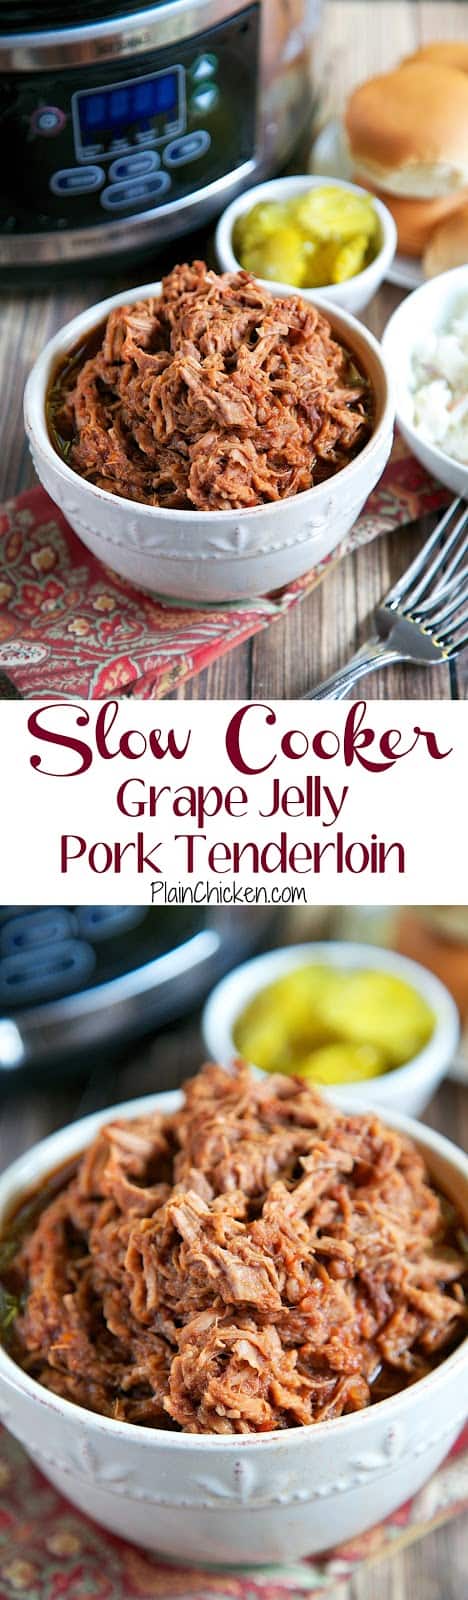 {Slow Cooker} Grape Jelly Pork Tenderloin - only 3 ingredients! Just dump everything in the slow cooker and let it hang out all day. Fix it and forget it! Serve the pork on slider buns with coleslaw and pickles! Great for tailgating!